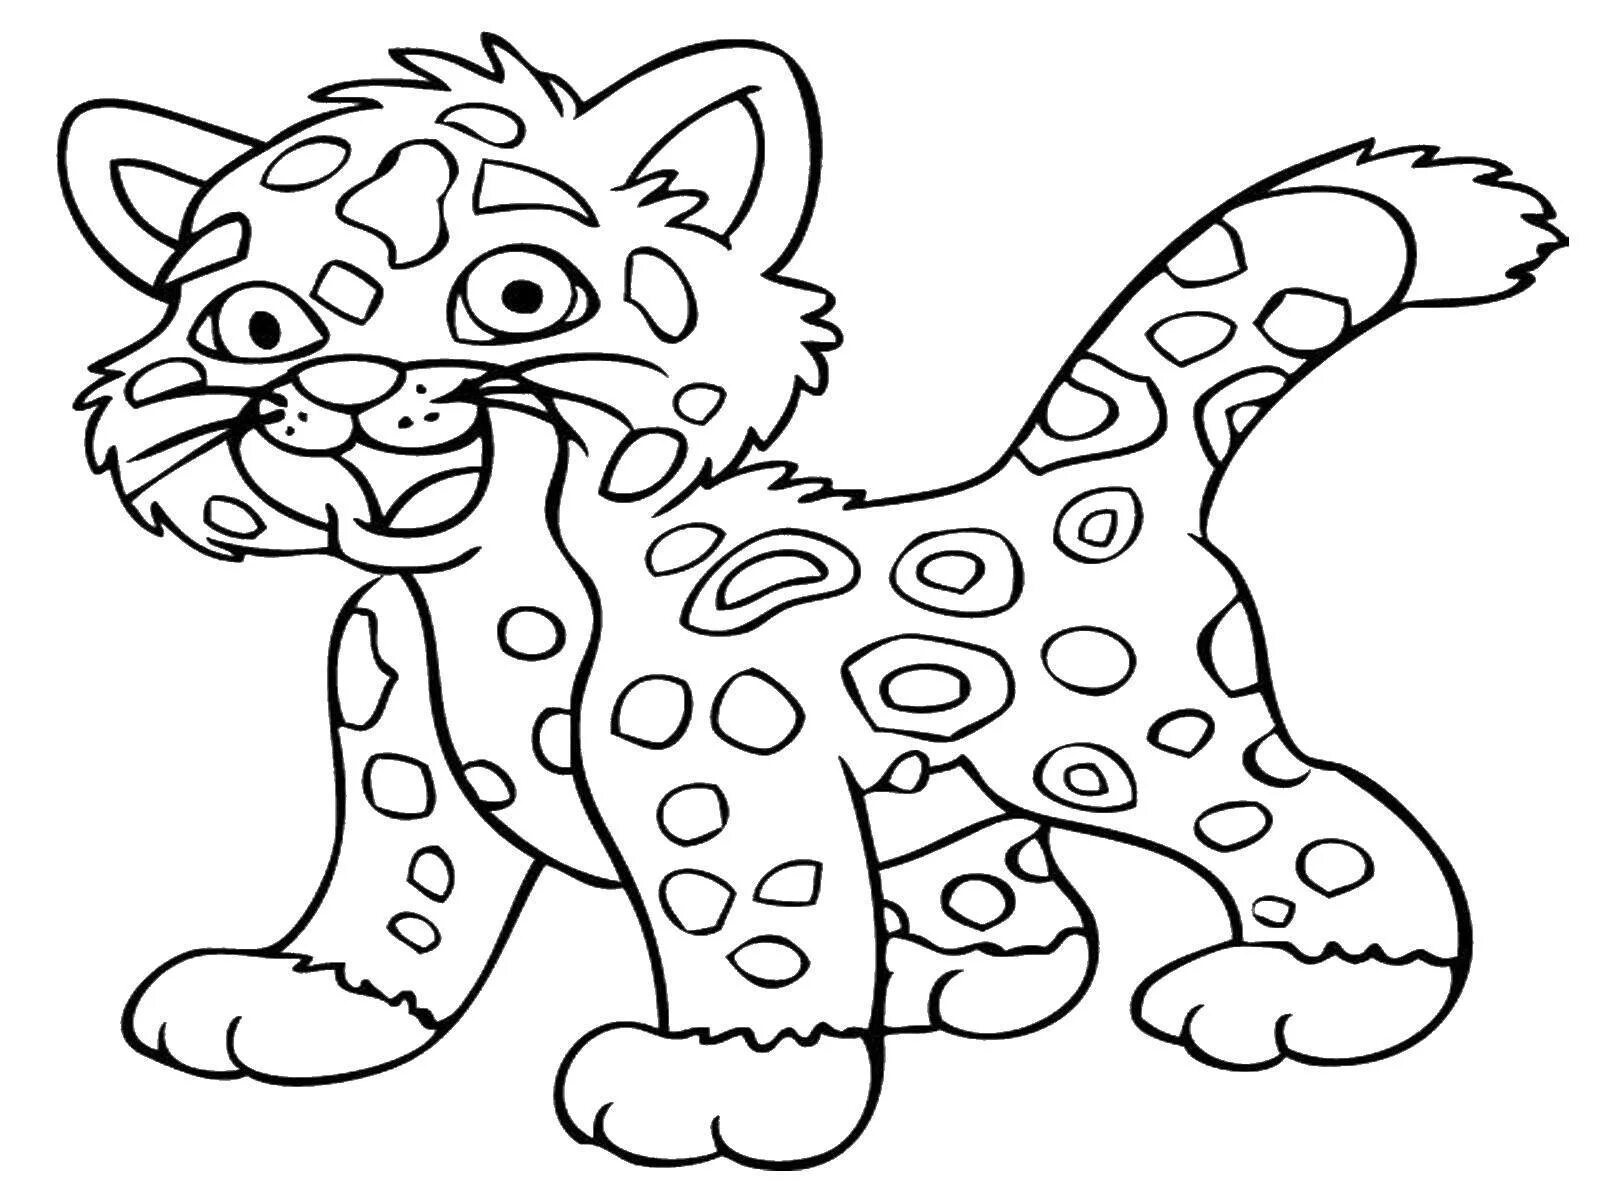 Coloring book outstanding leopard